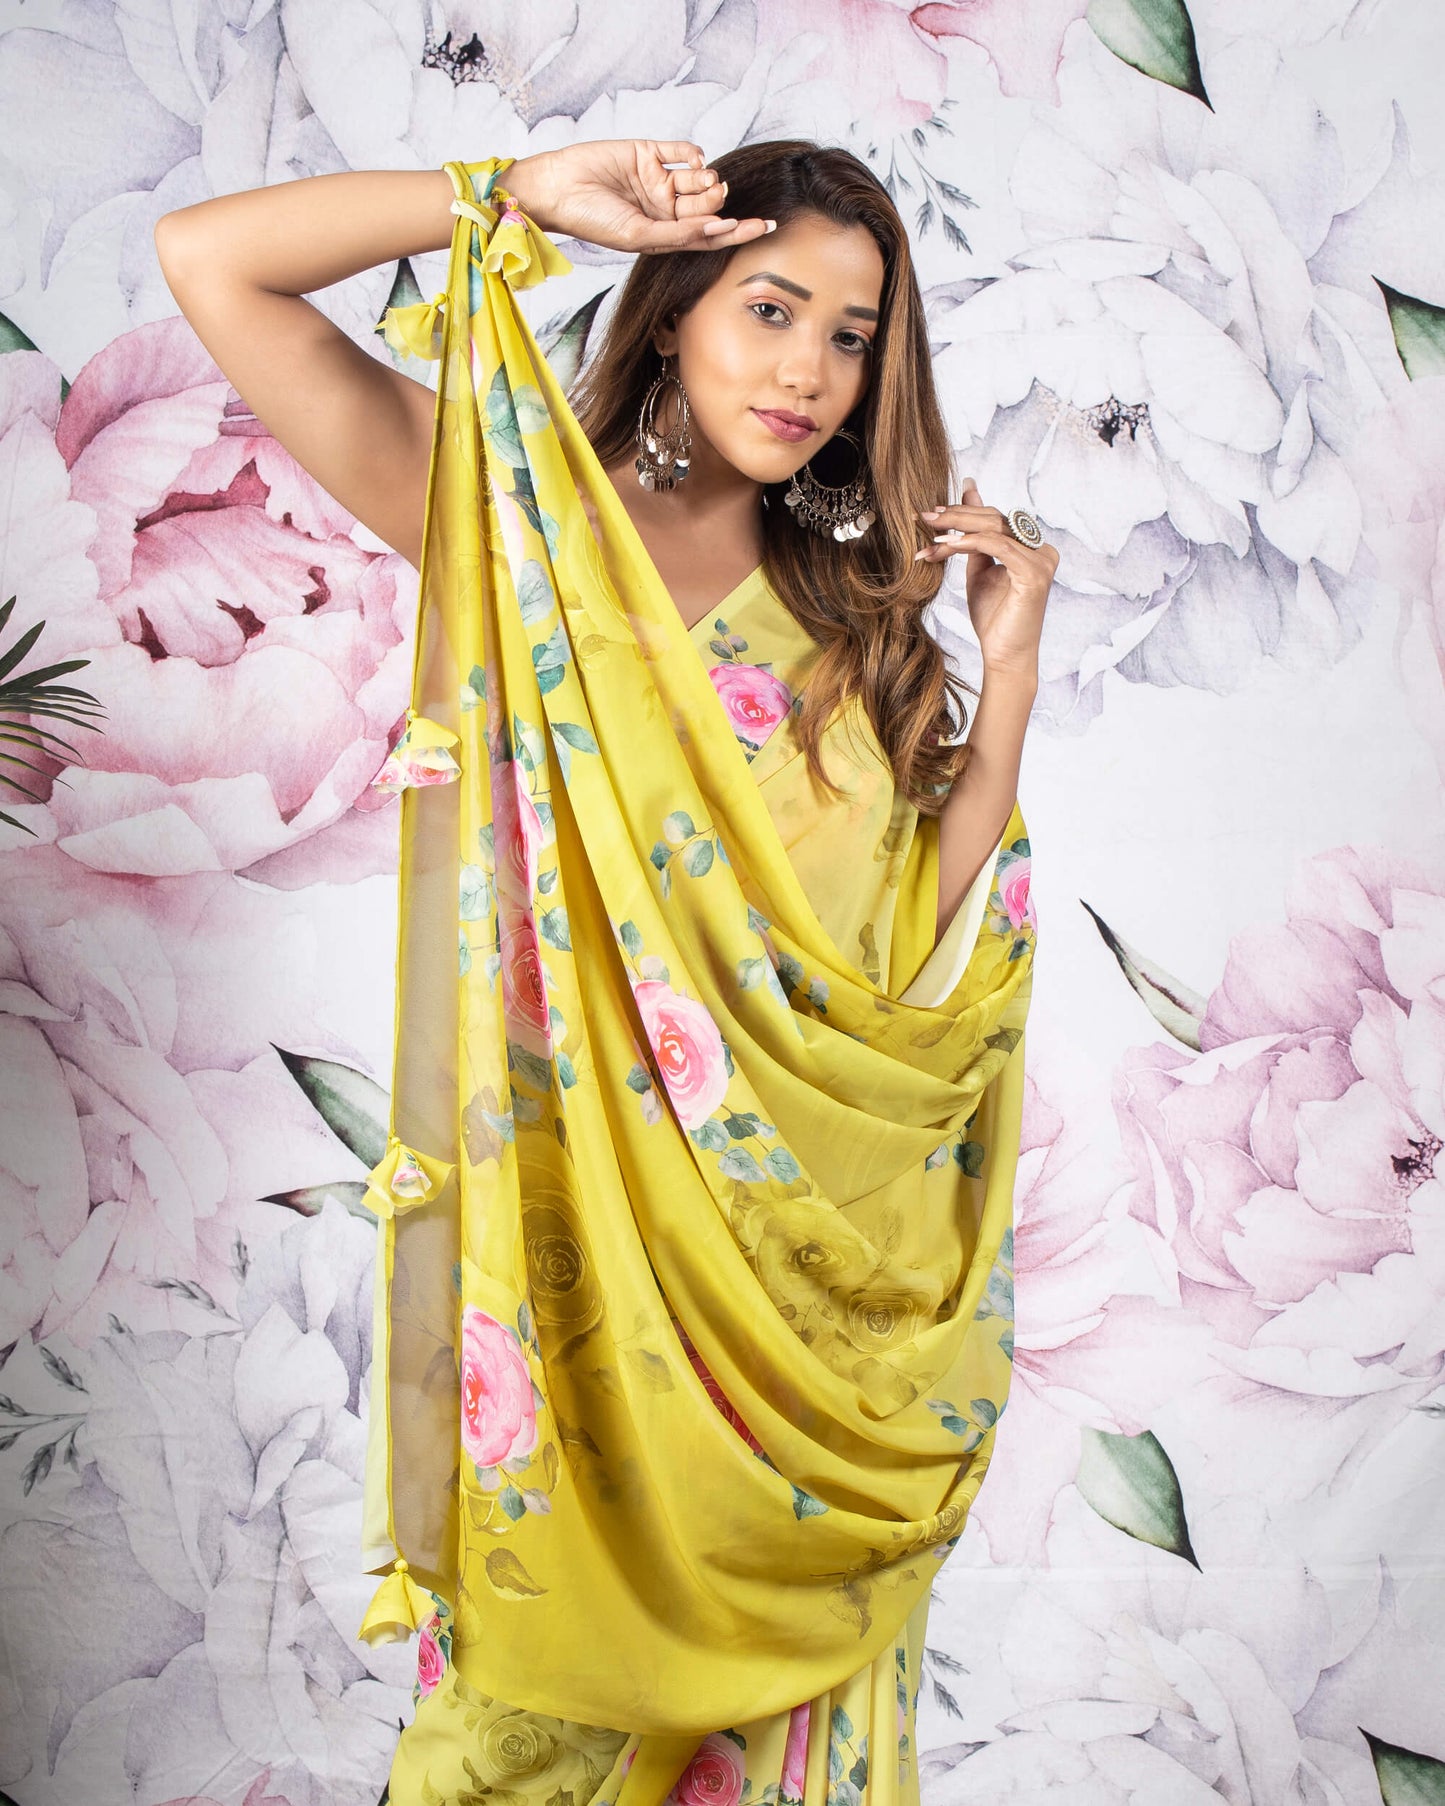 Medallian Yellow And Pink Floral Pattern Digital Print Georgette Saree With Tassels